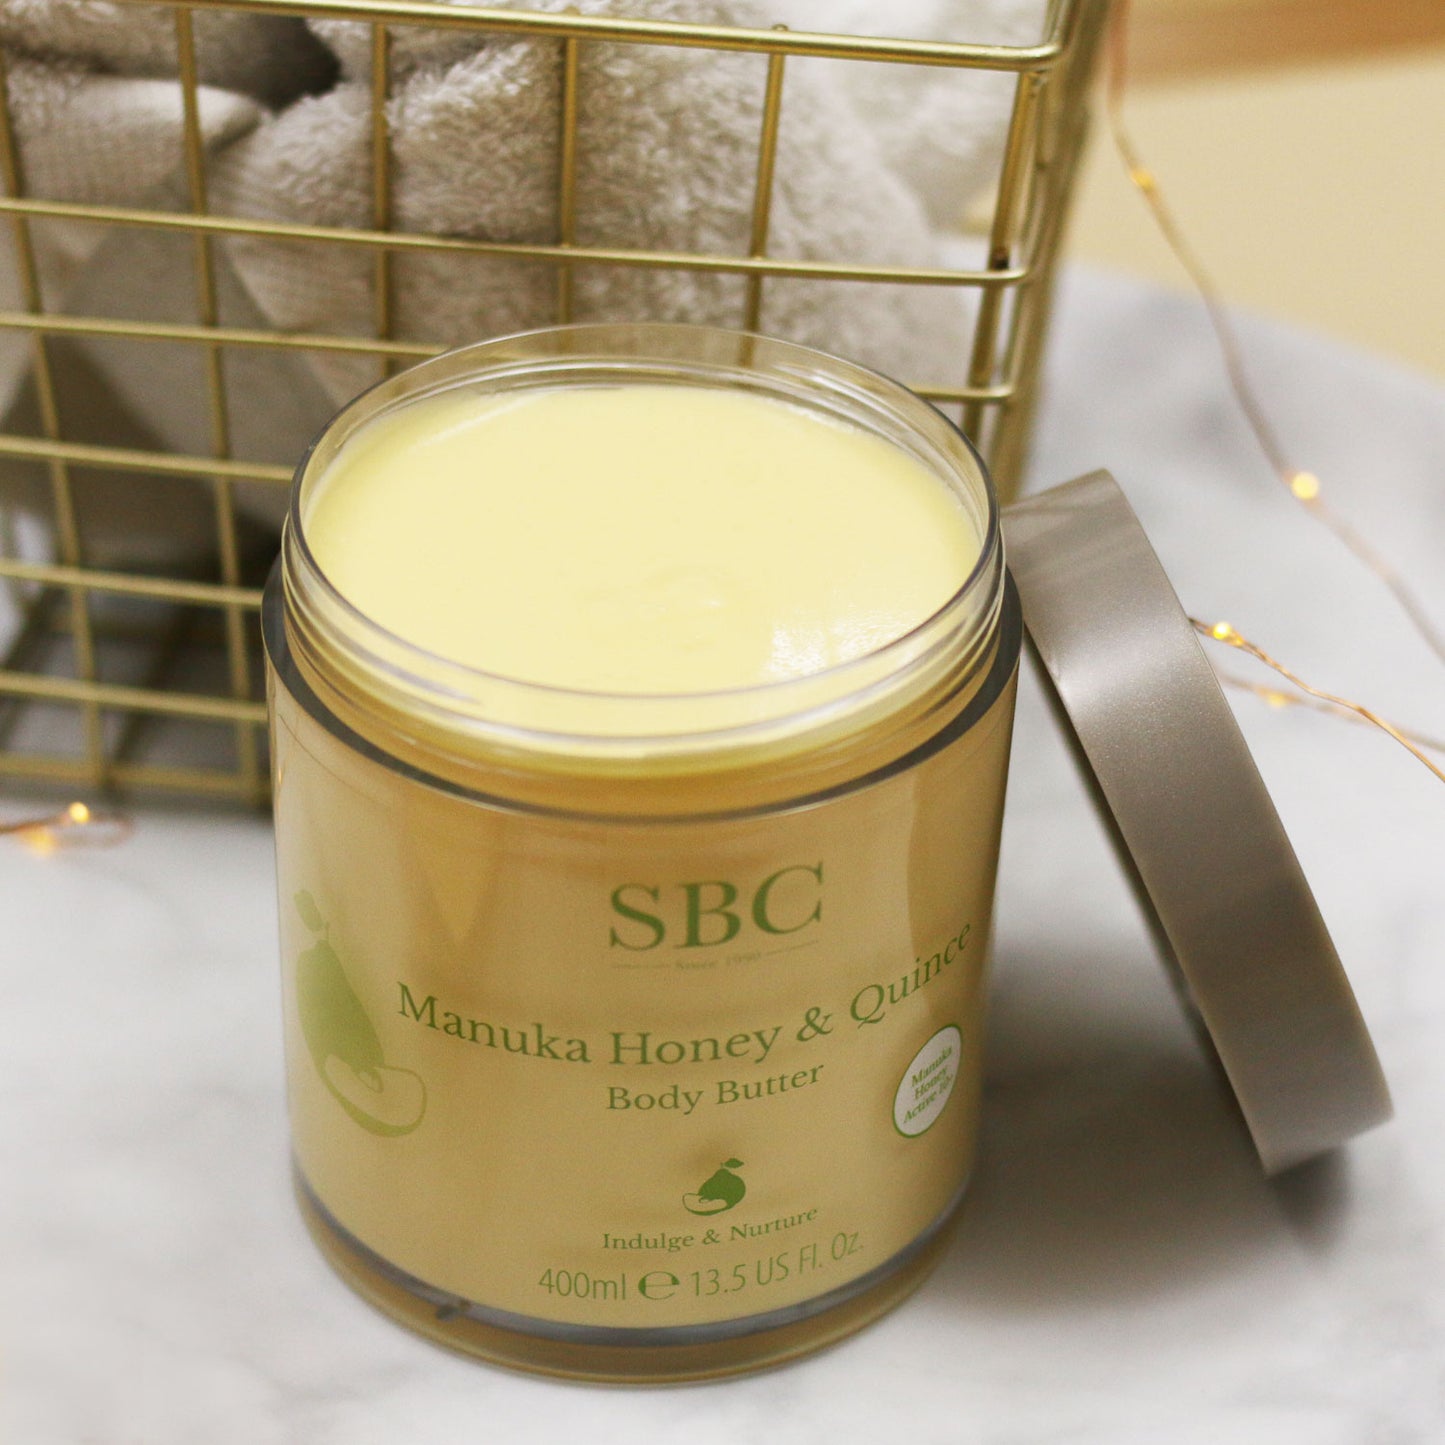 Manuka Honey & Quince Body Butter with its lid off on a marble in font of a gold basket 